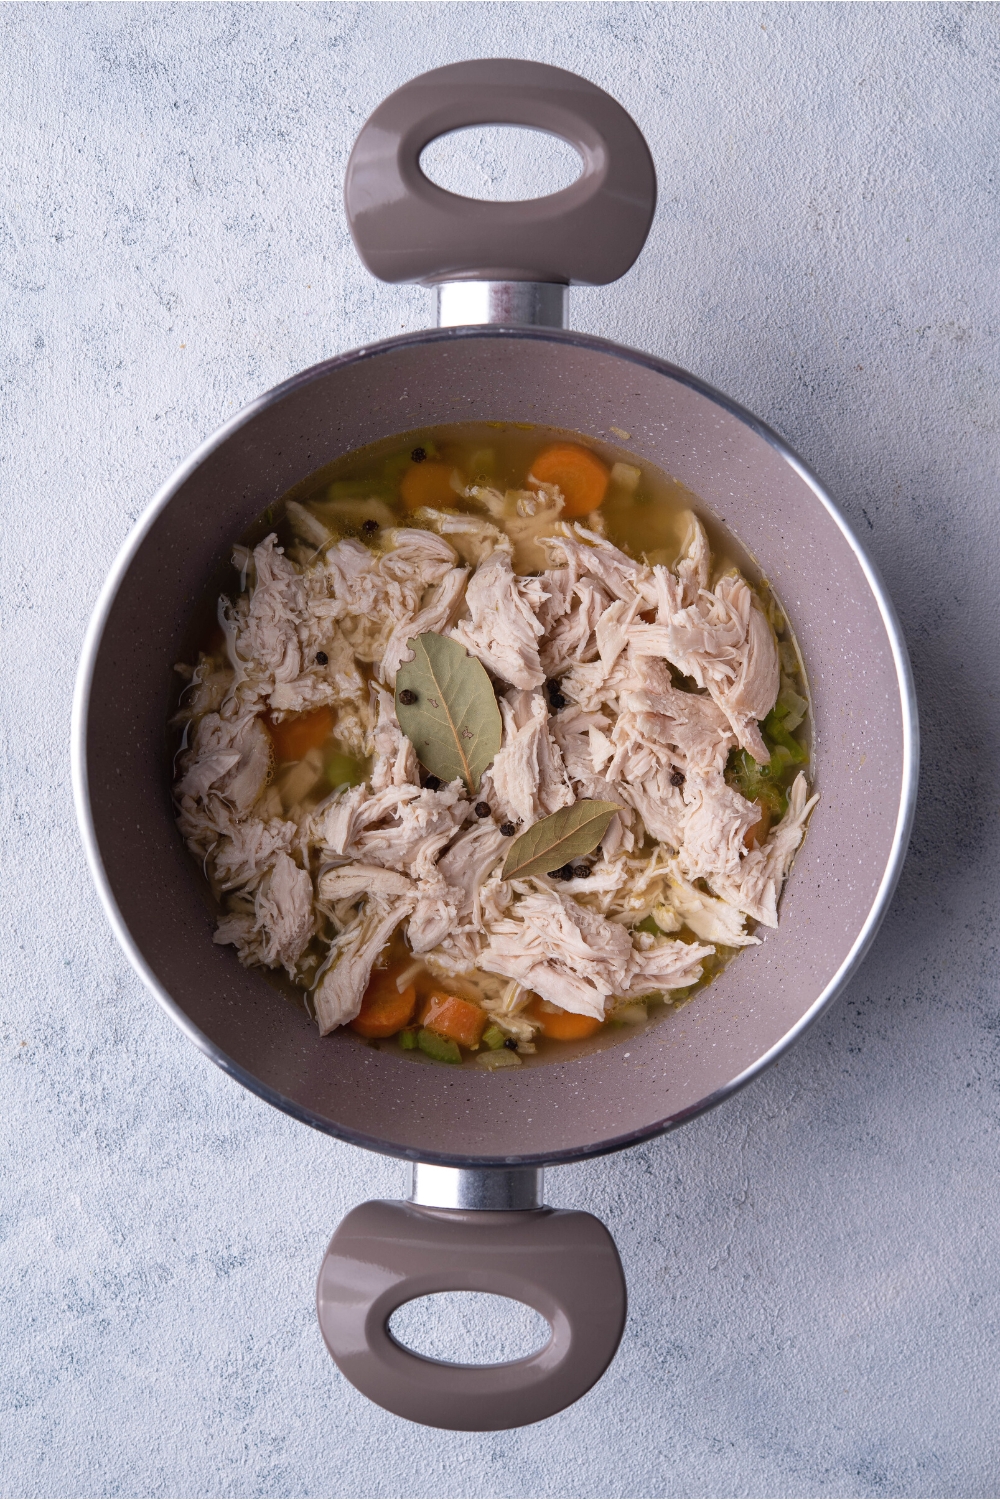 Shredded chicken on top of veggies and broth in a pot.